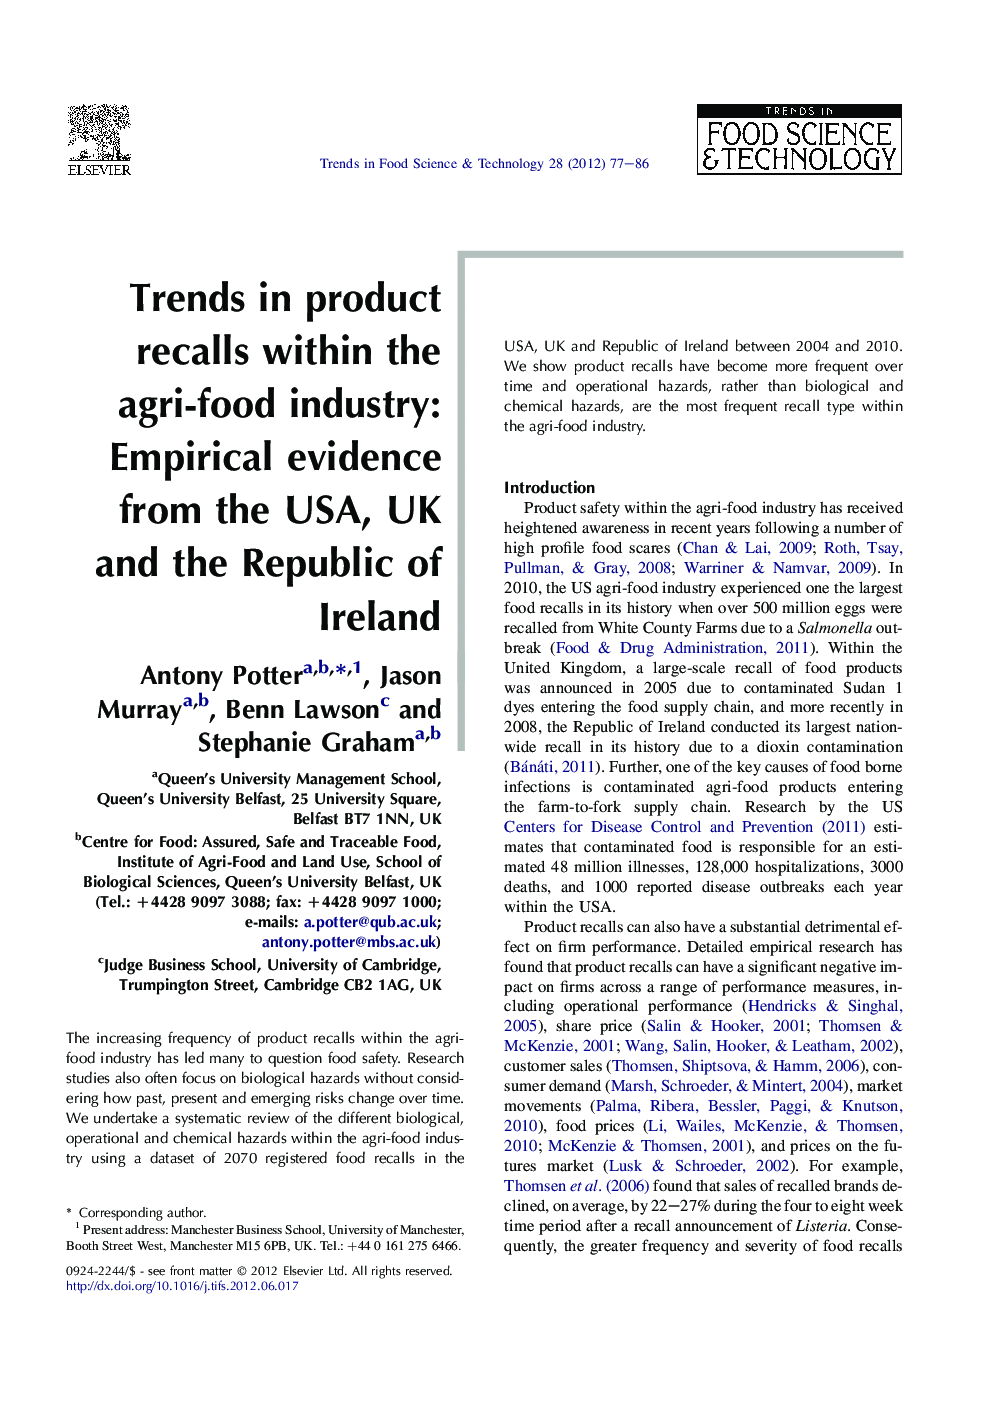 Trends in product recalls within the agri-food industry: Empirical evidence from the USA, UK and the Republic of Ireland